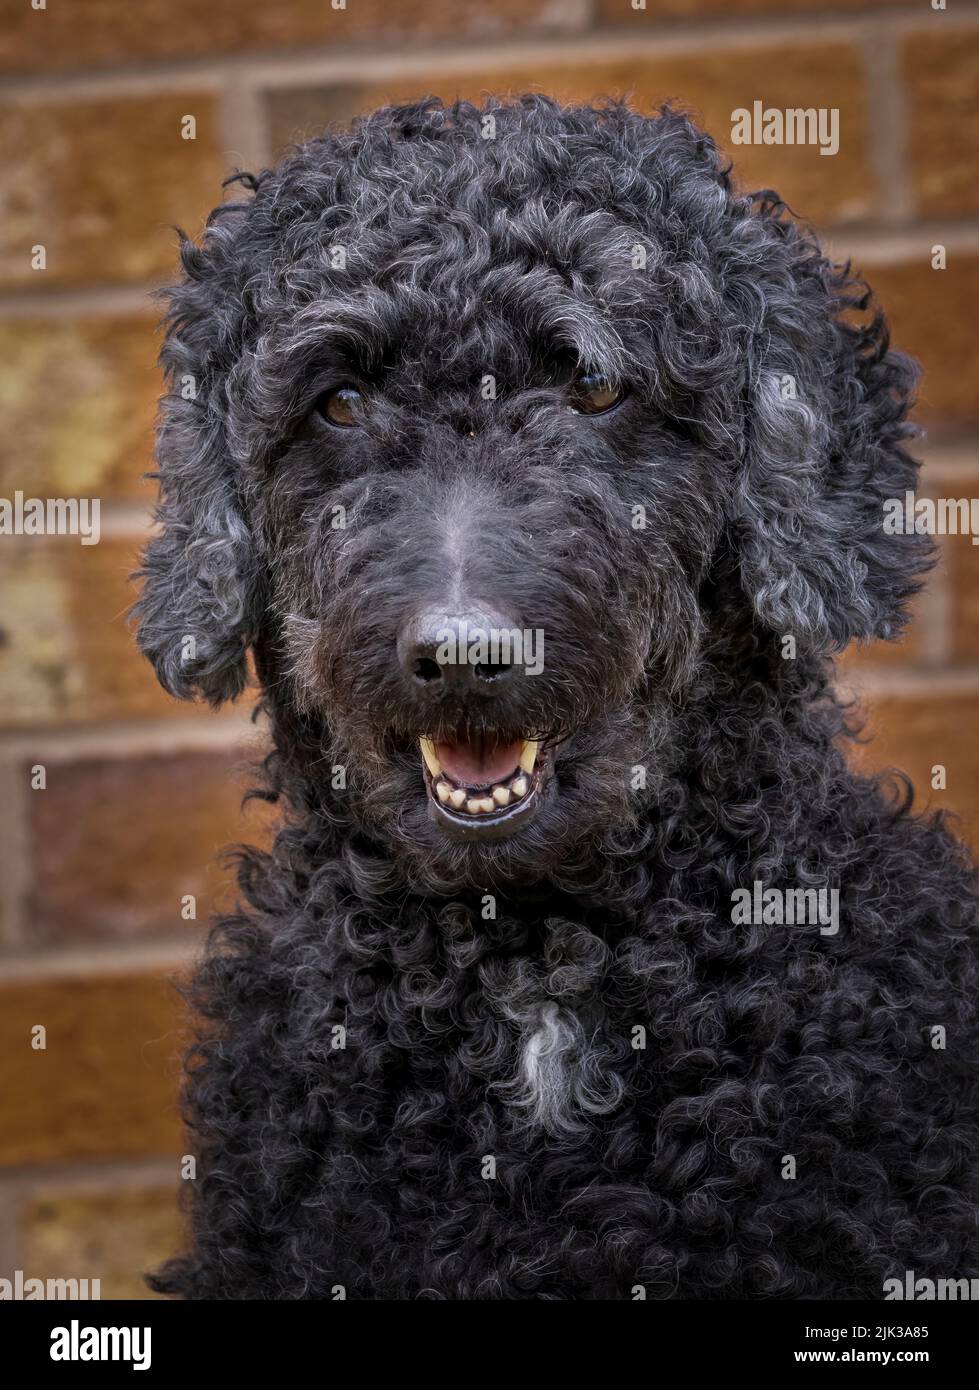 Cute black Labradoodle dog,  looking towards the camera with mouth open. Photographed against a brick wall Stock Photo